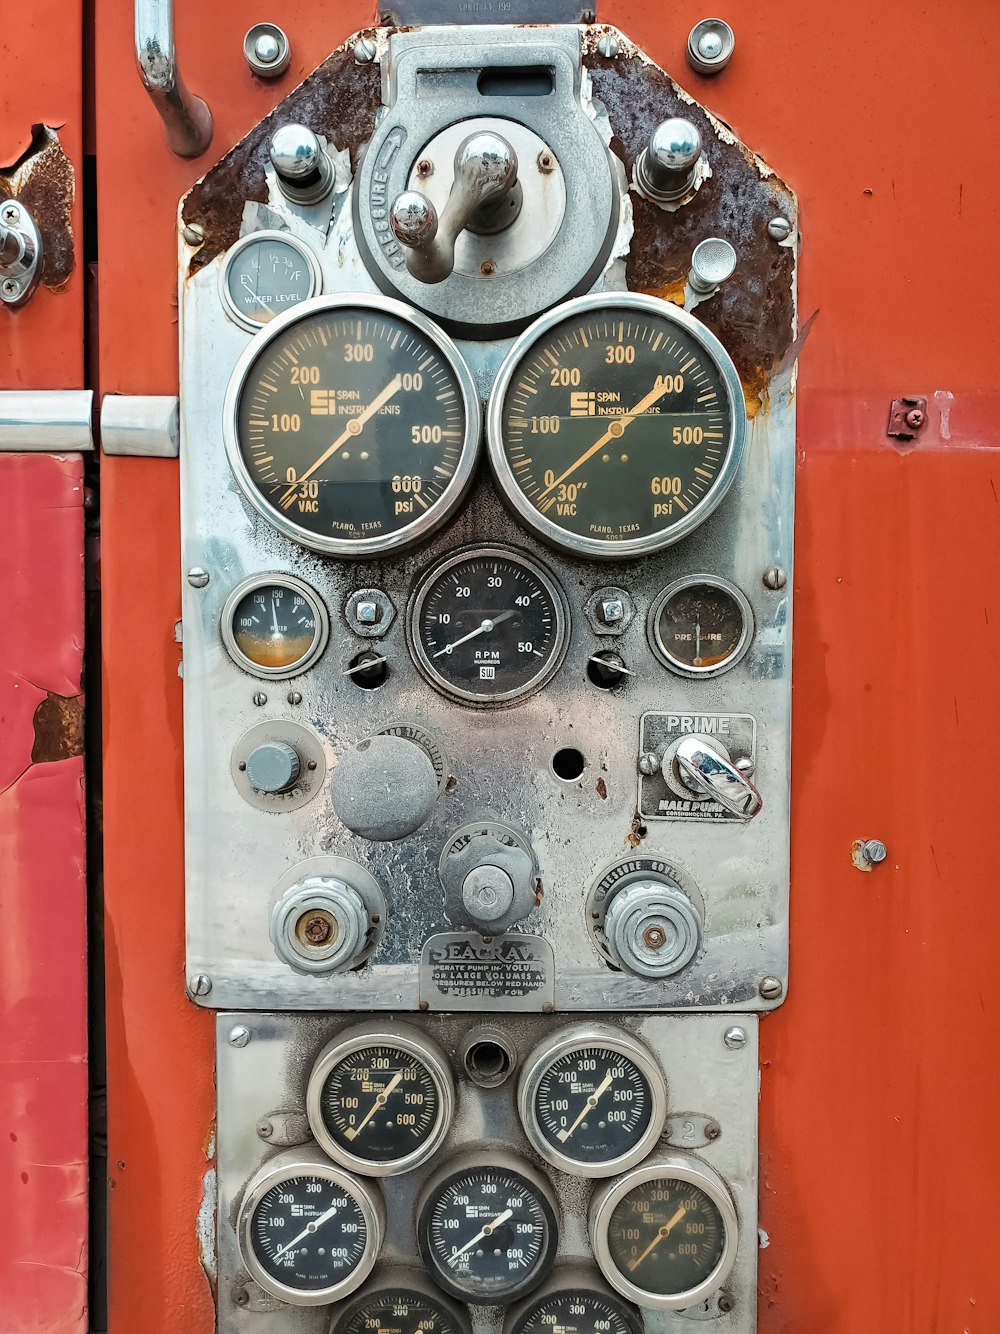 a close-up of a control panel